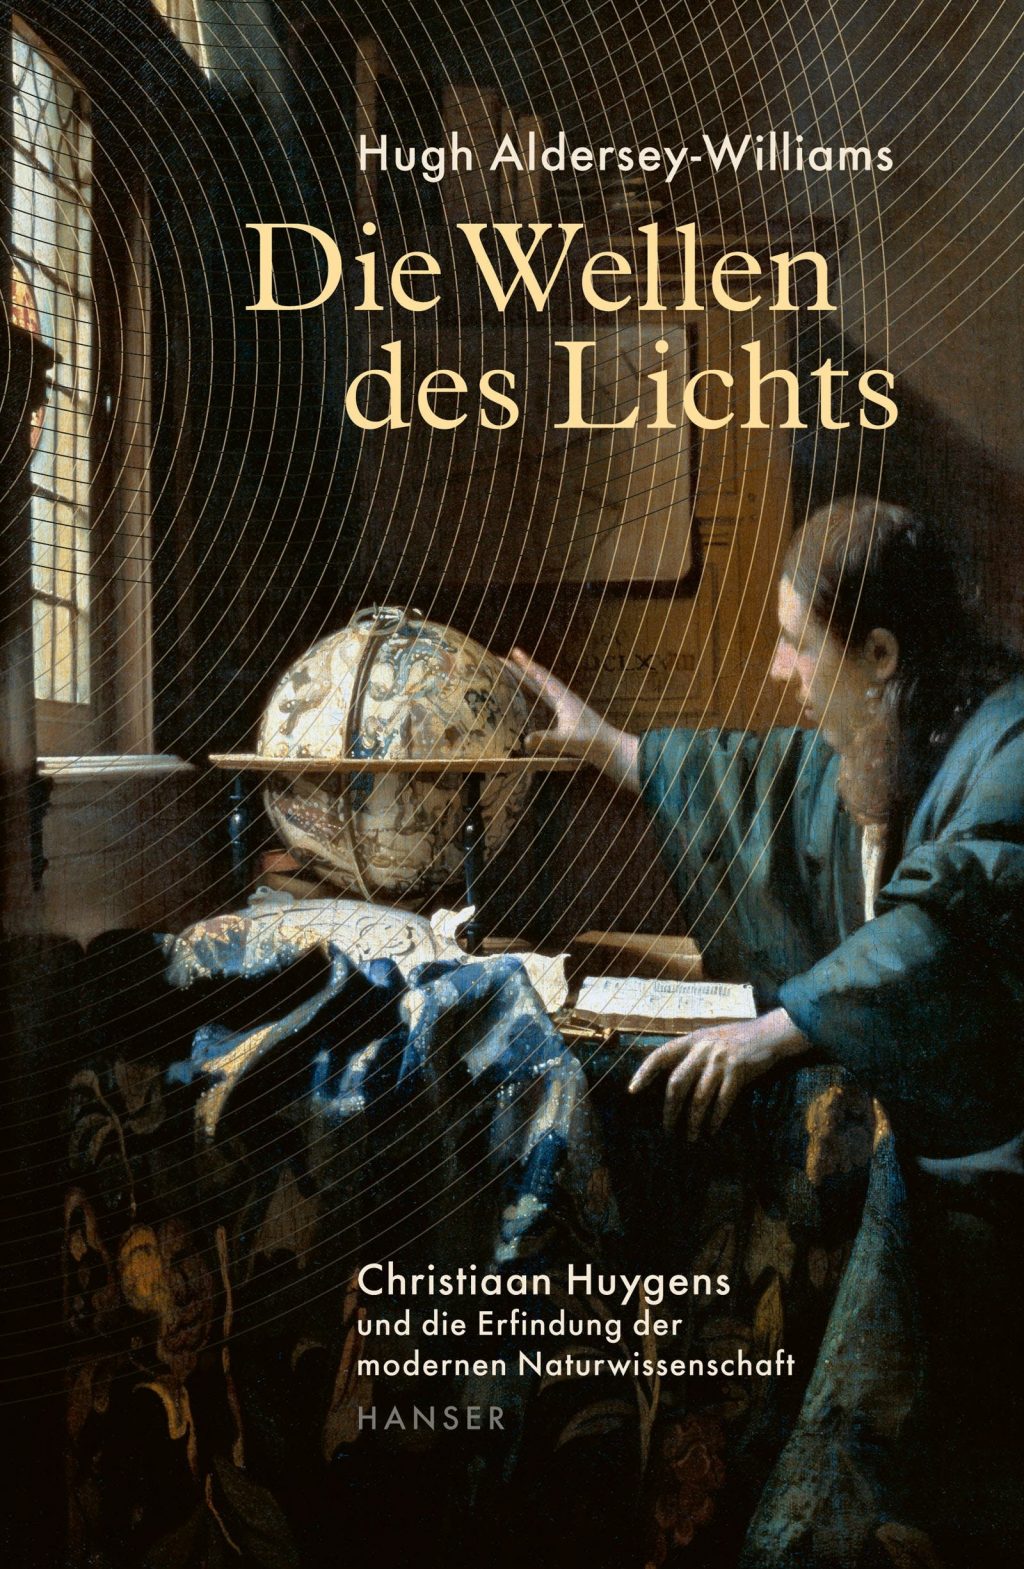 Review of the book "Waves of Light"